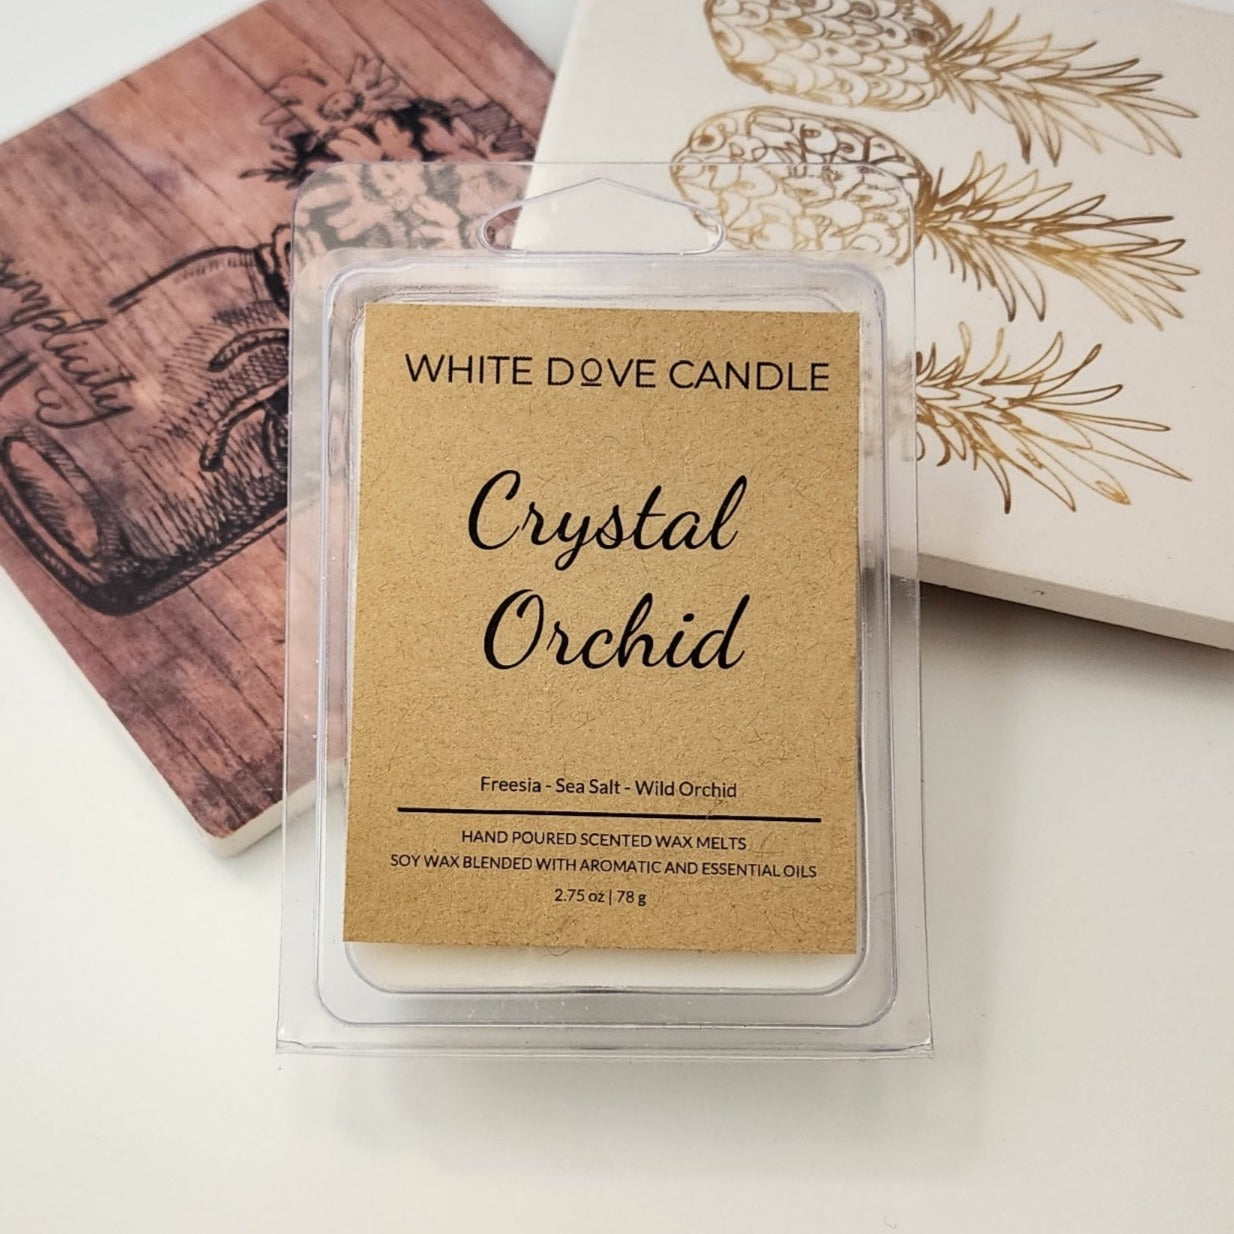 Crystal Orchid Wax Melts